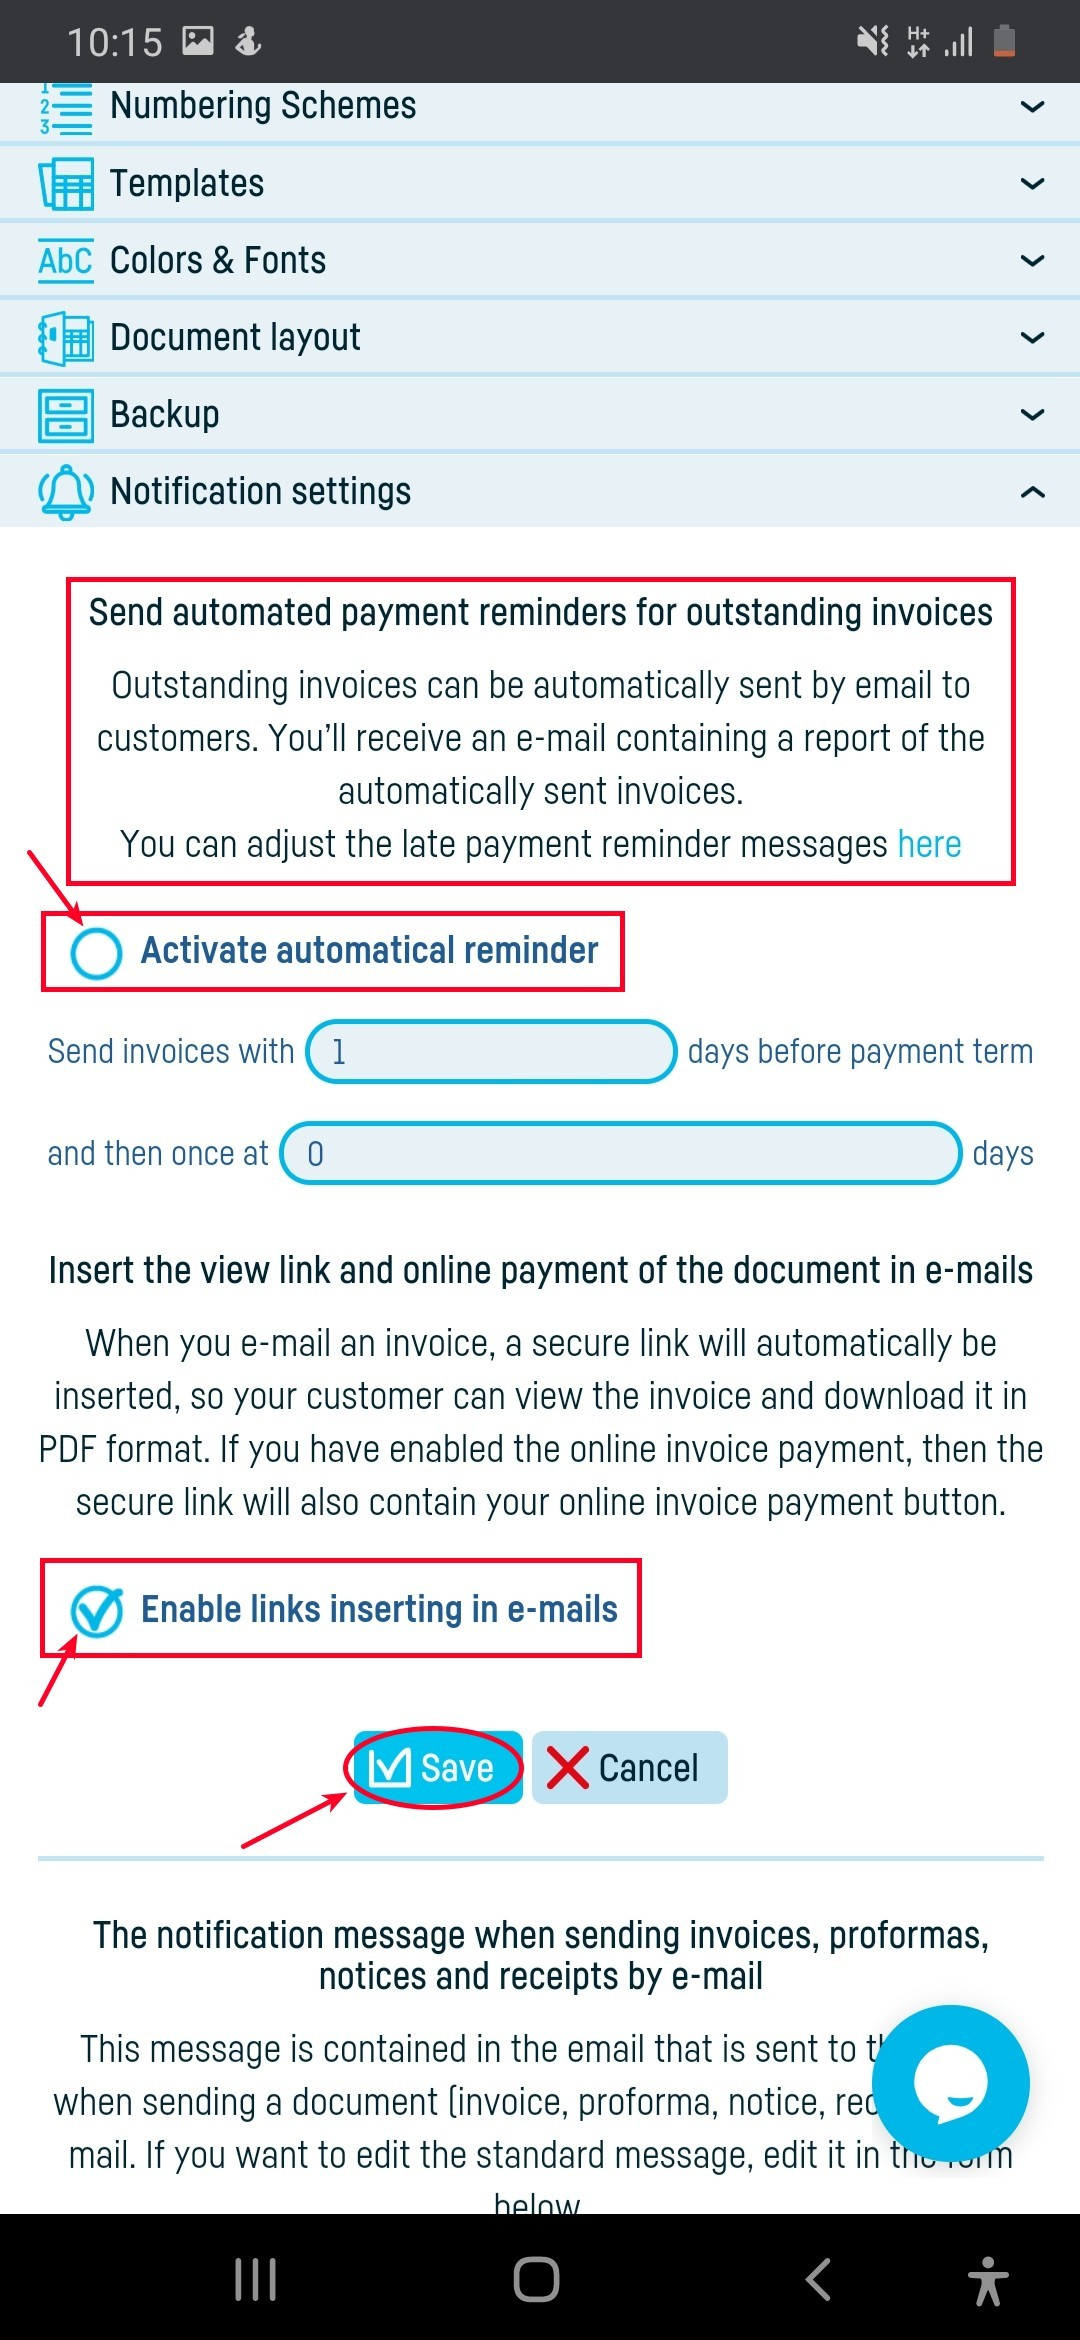 How can I send due invoices by e-mail? - step 3